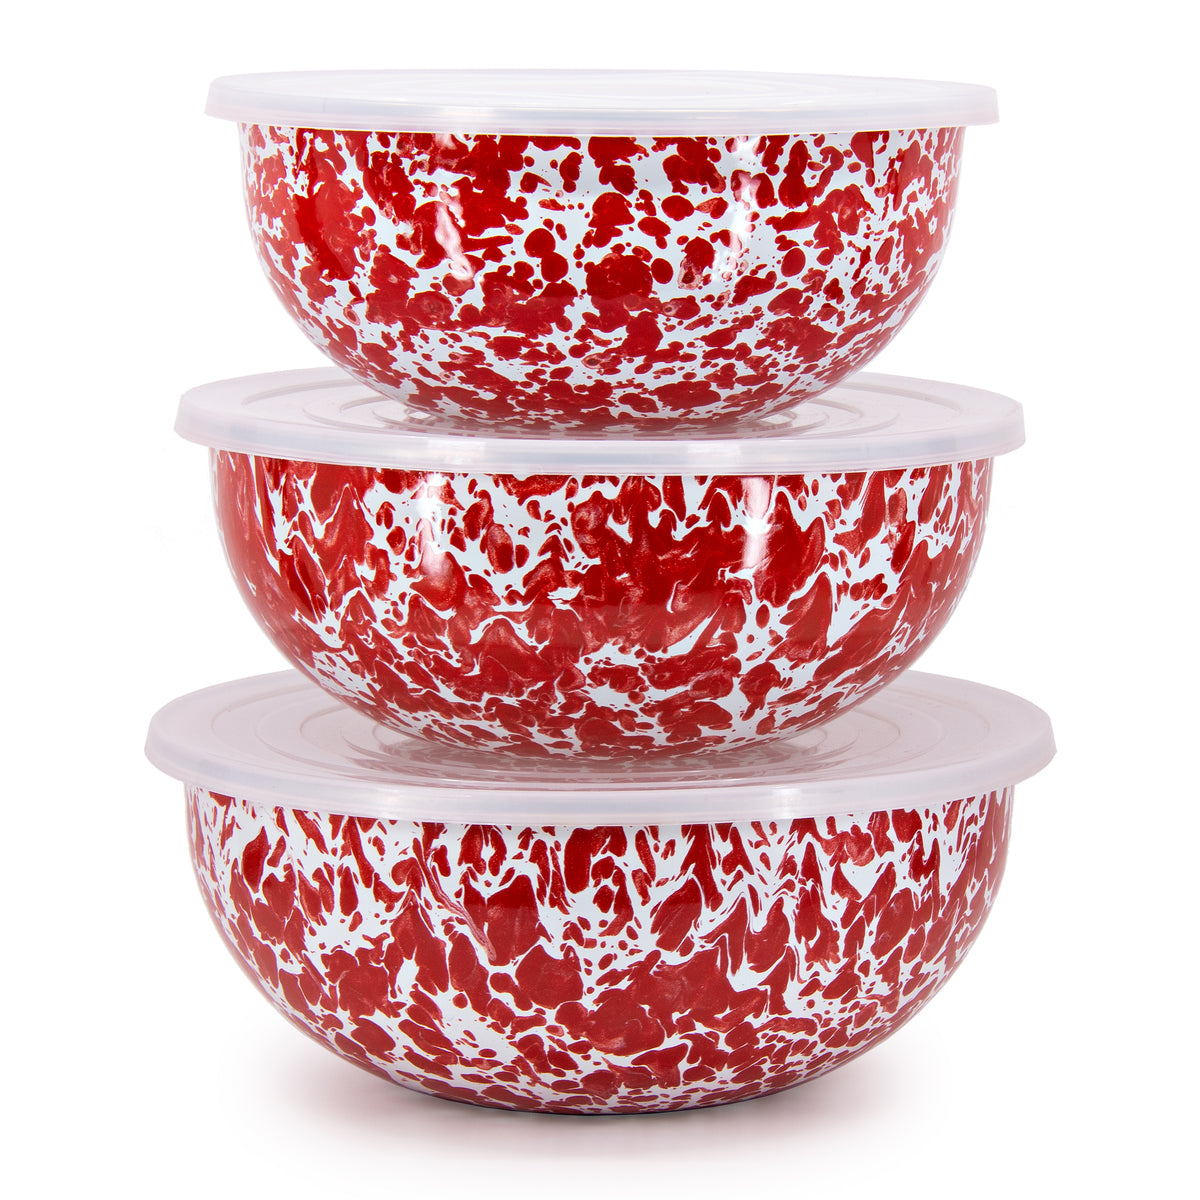 Mixing Bowls in Red Swirl